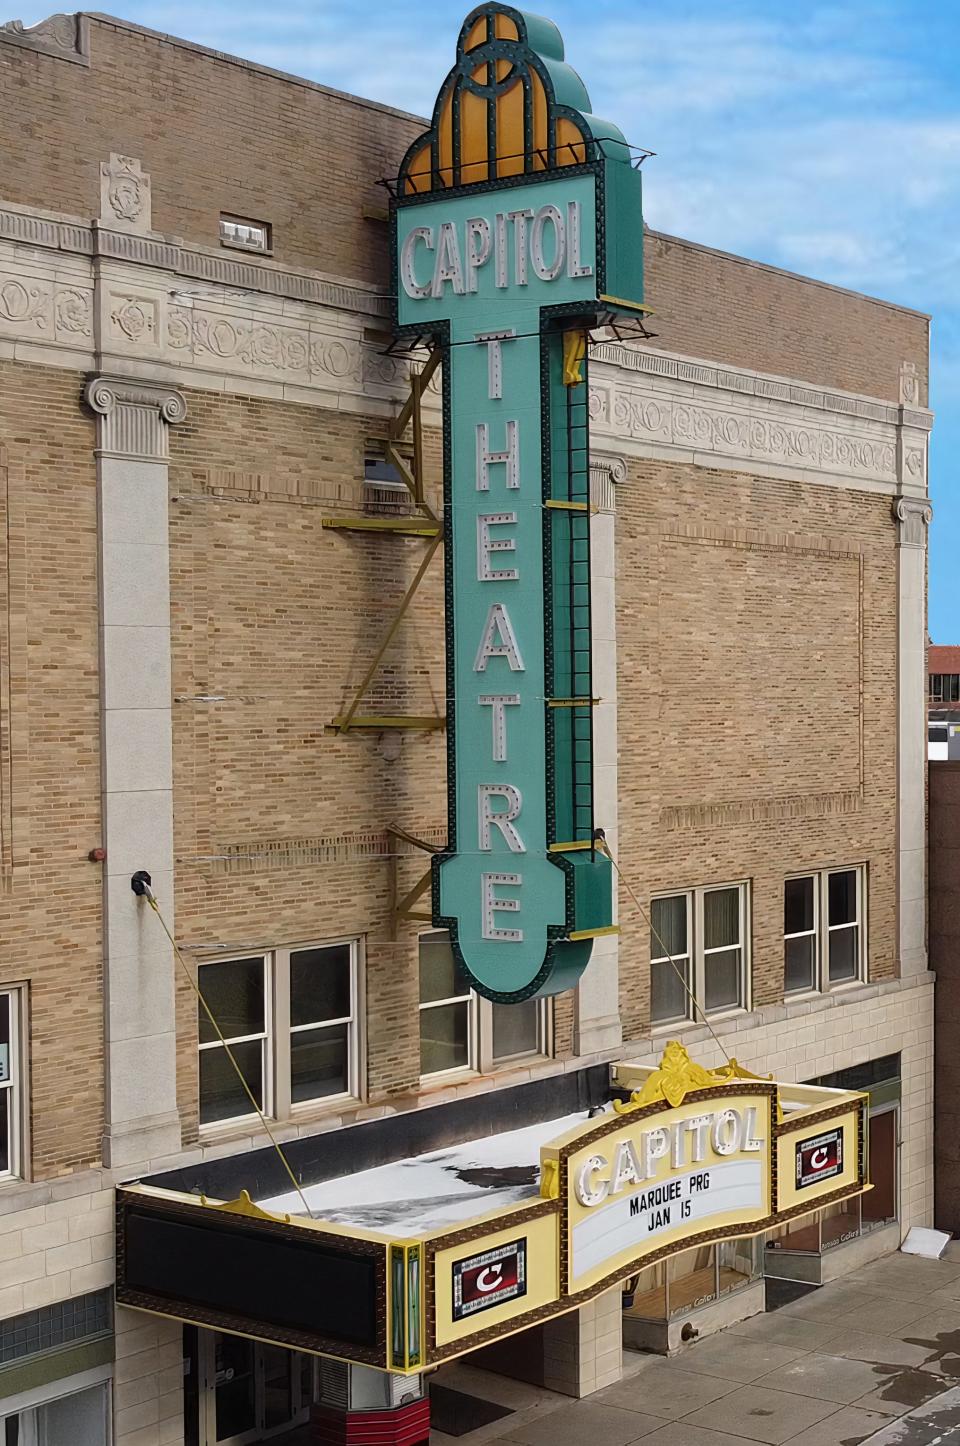 The Capitol Theatre in Rome underwent a $2.5 million renovation, completed in 2021, including a replica of its original marquee from 1928. Oneida County is now giving the theater money to improve its HVAC system.